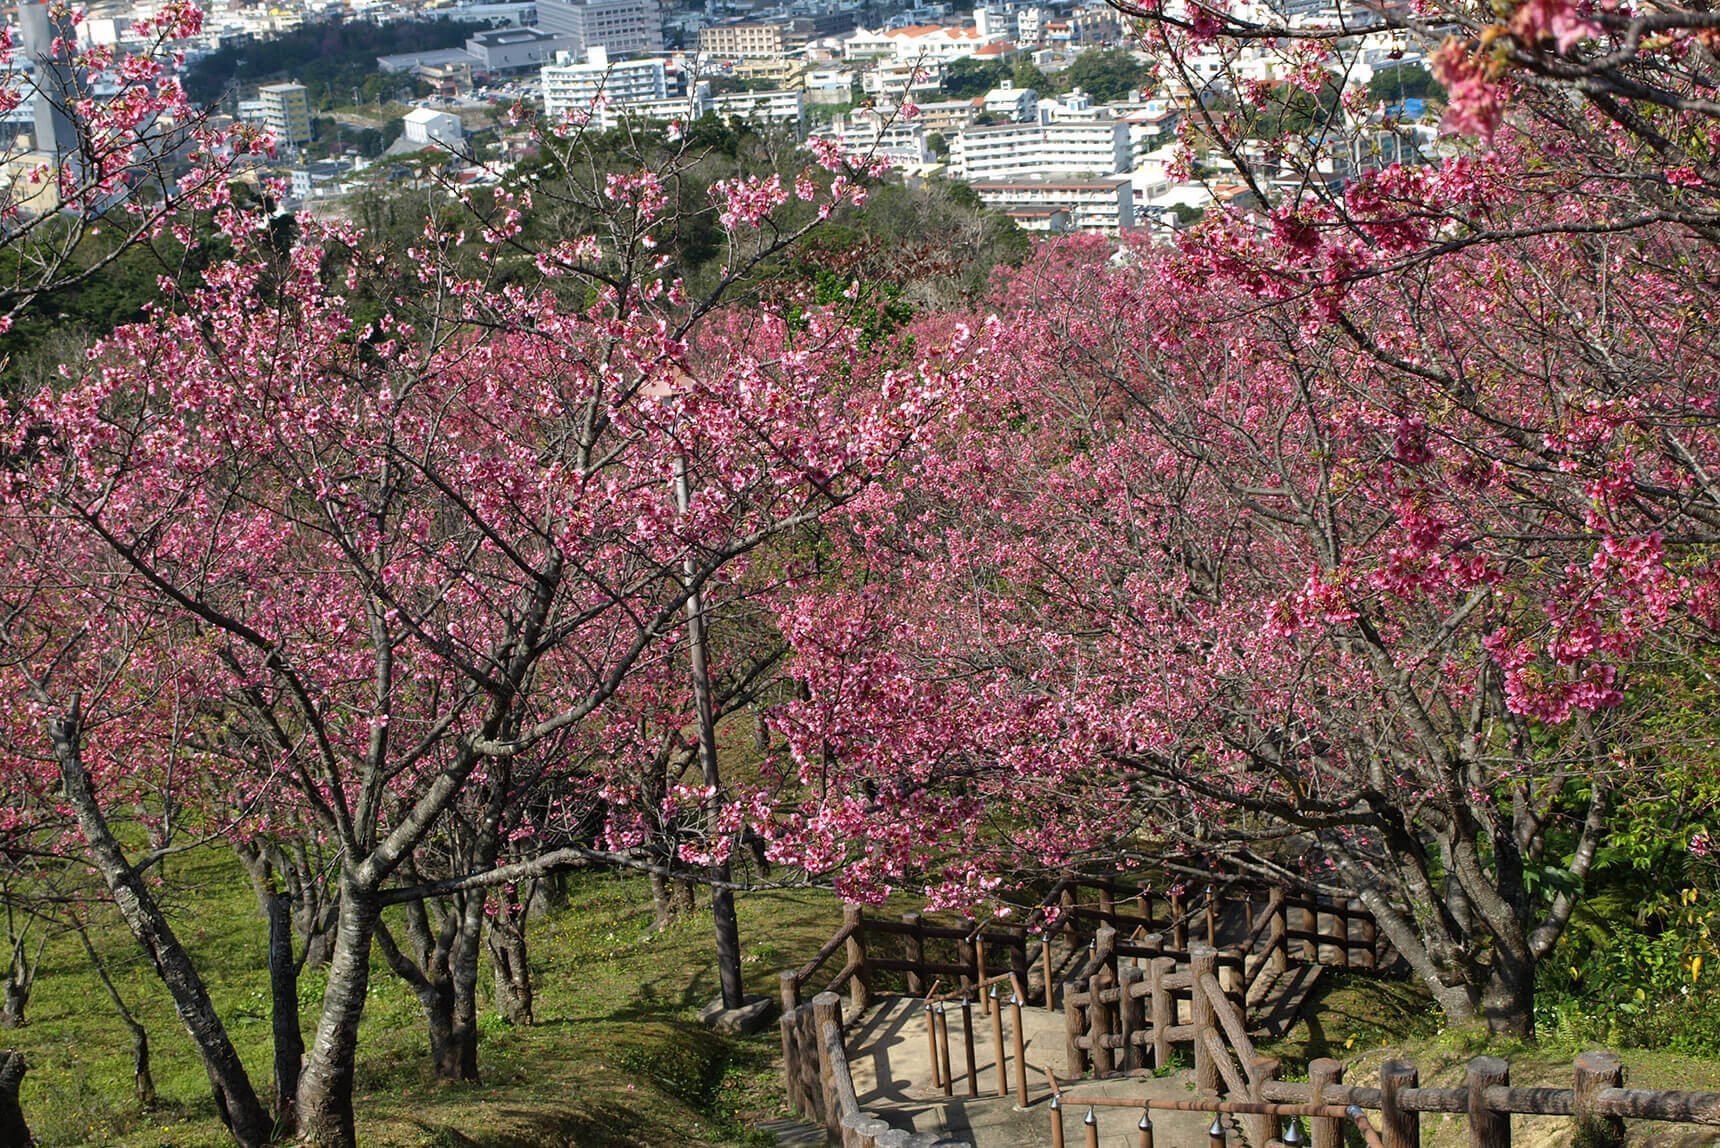 Don’t miss the cherry blossoms in full bloom! Check out our top six